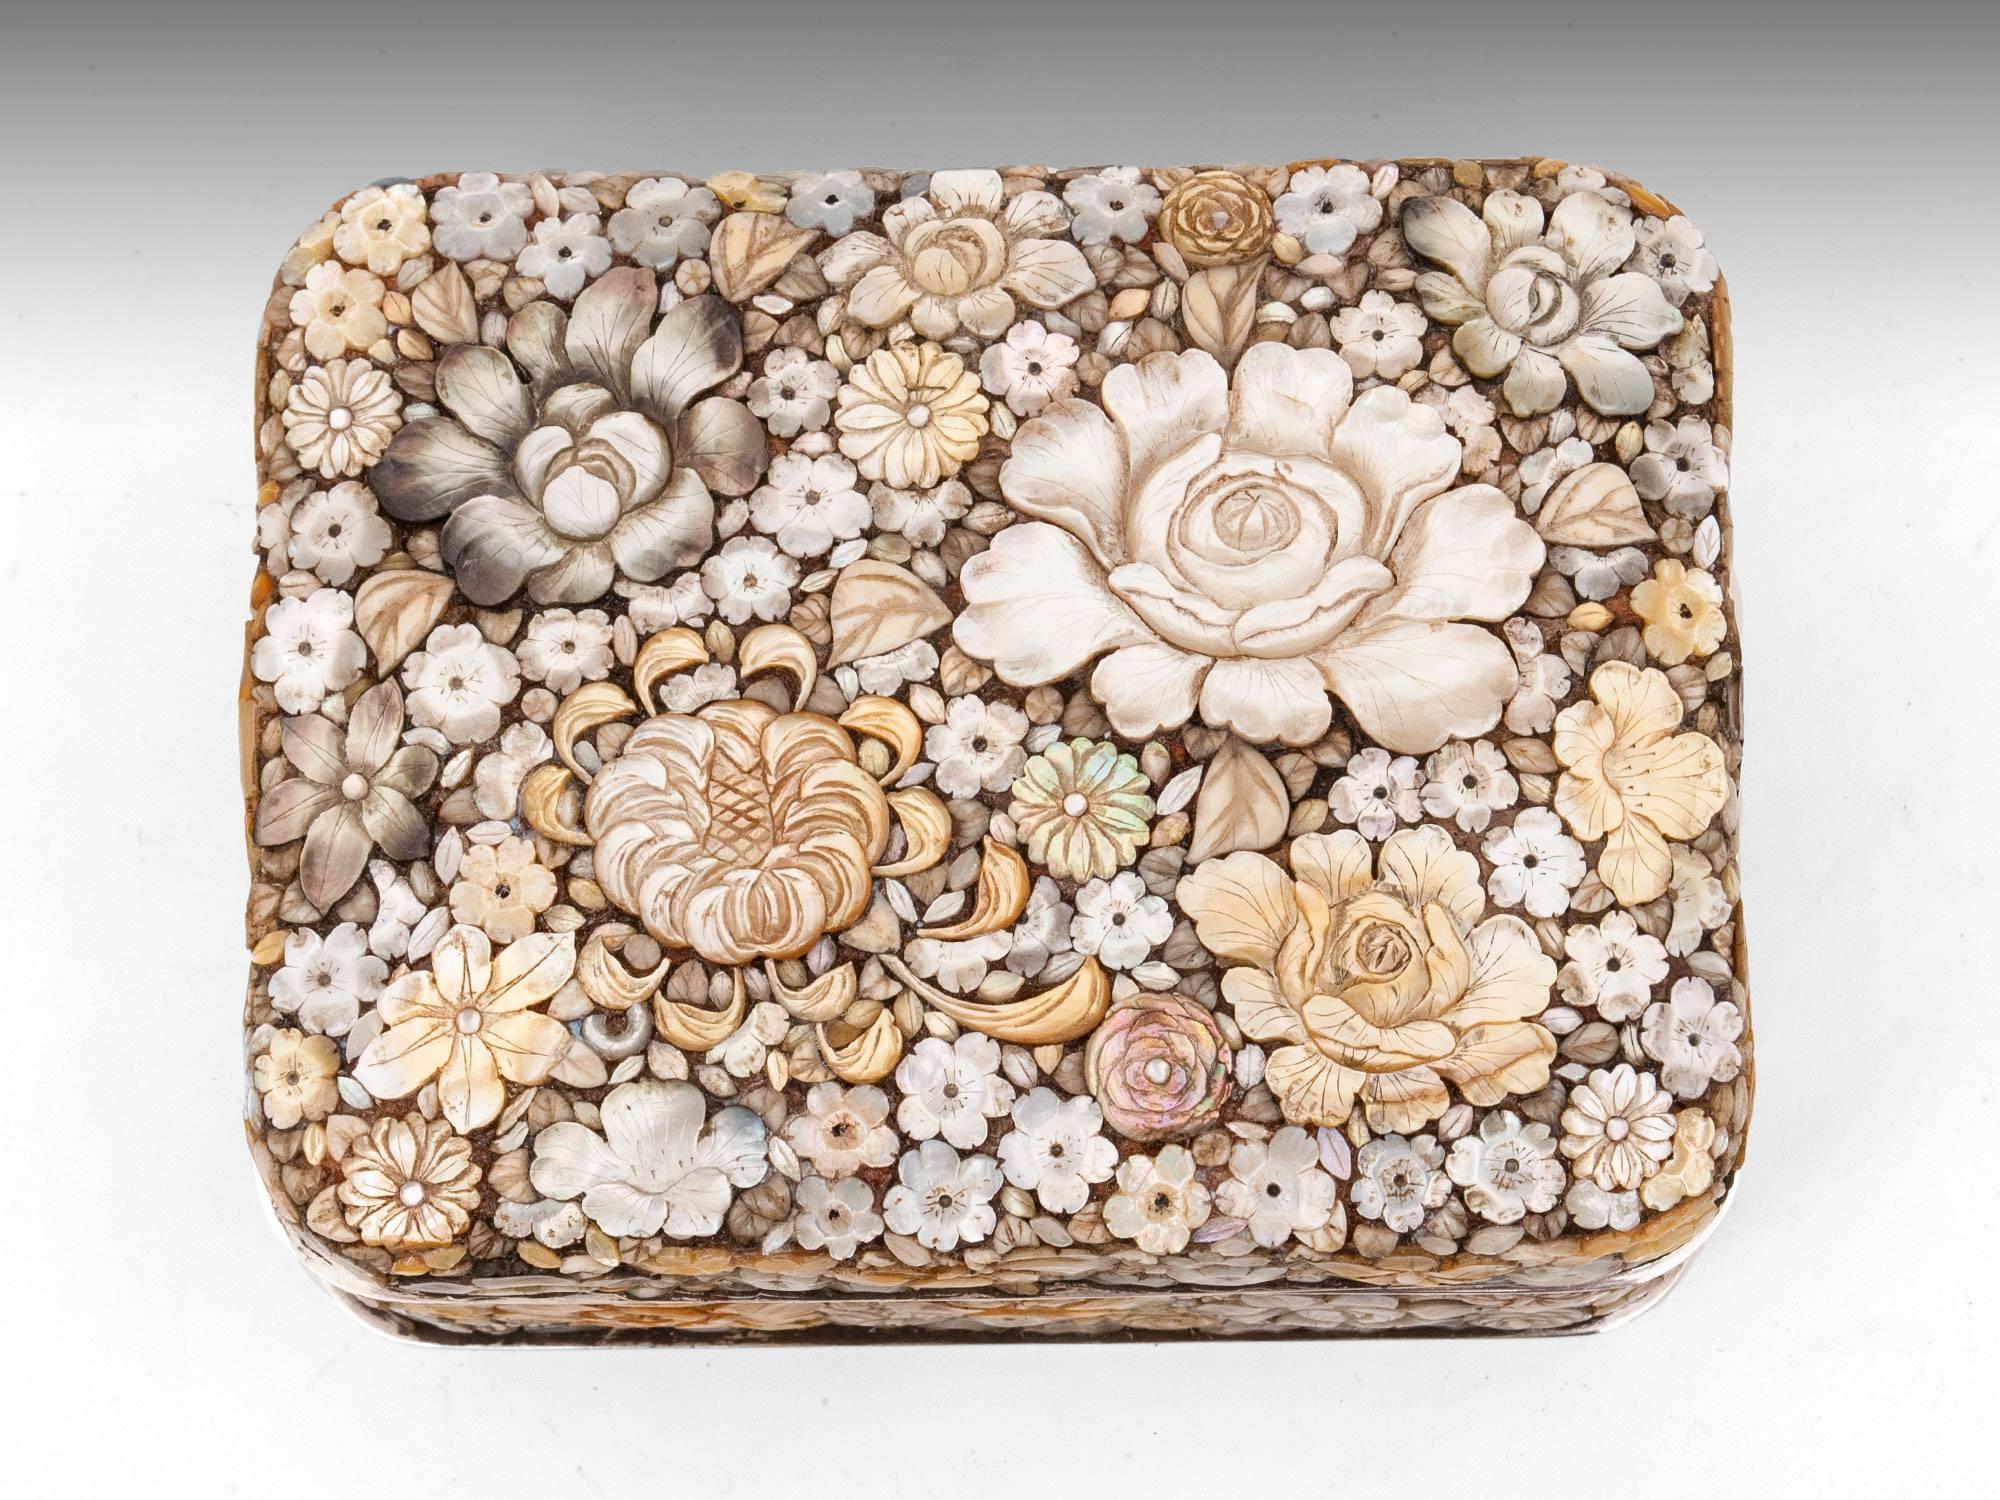 A rare and superb box encrusted with 100 of detailed engraved flowers and leaves of mother of pearl, abalone and bone. The base and lid have a silver rim, which helps to protect the delicate mother of pearl.
The lid lifts to reveal a beautiful